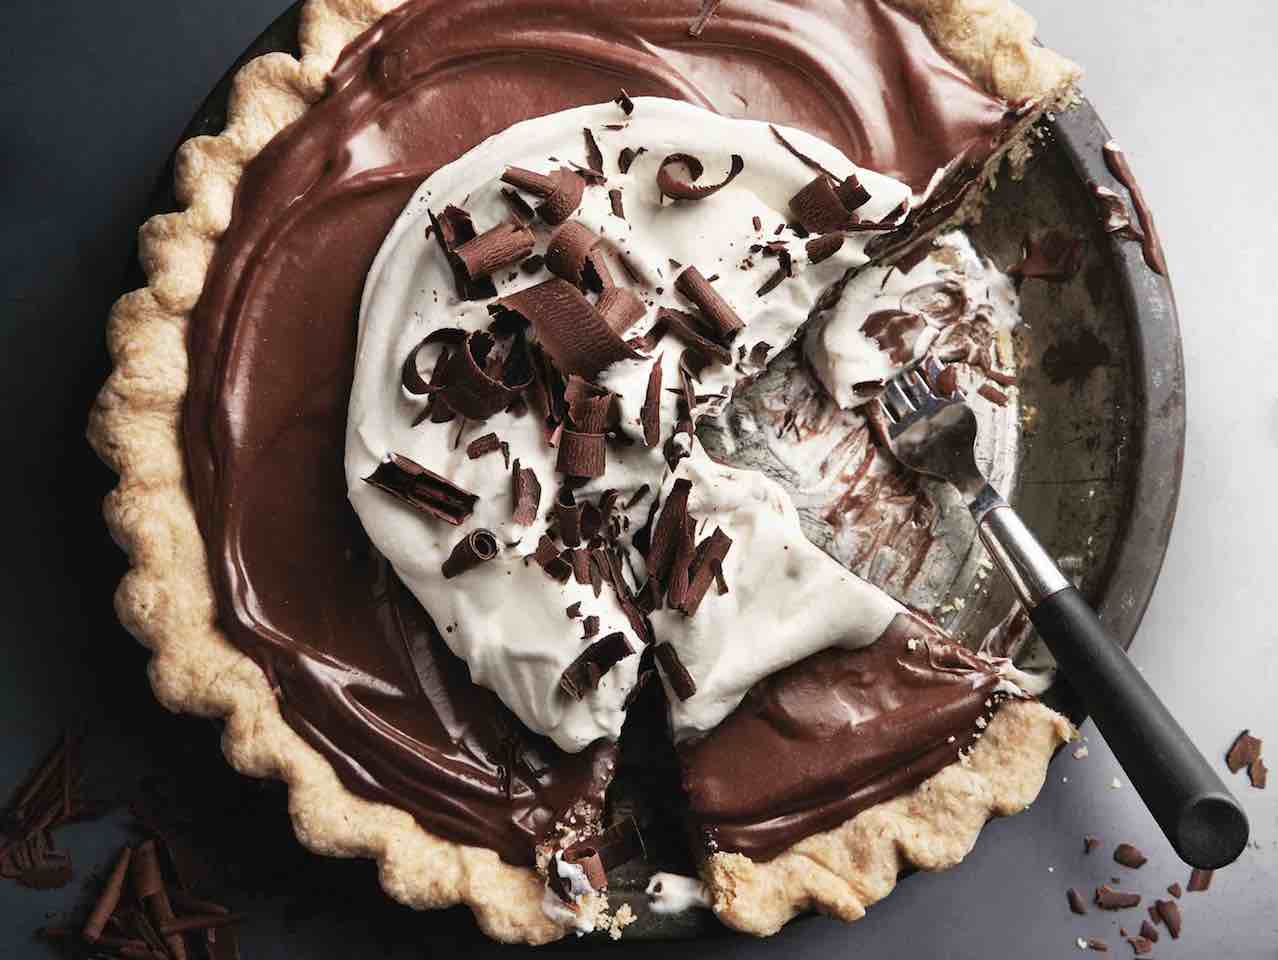 Chocolate pudding-filled pie